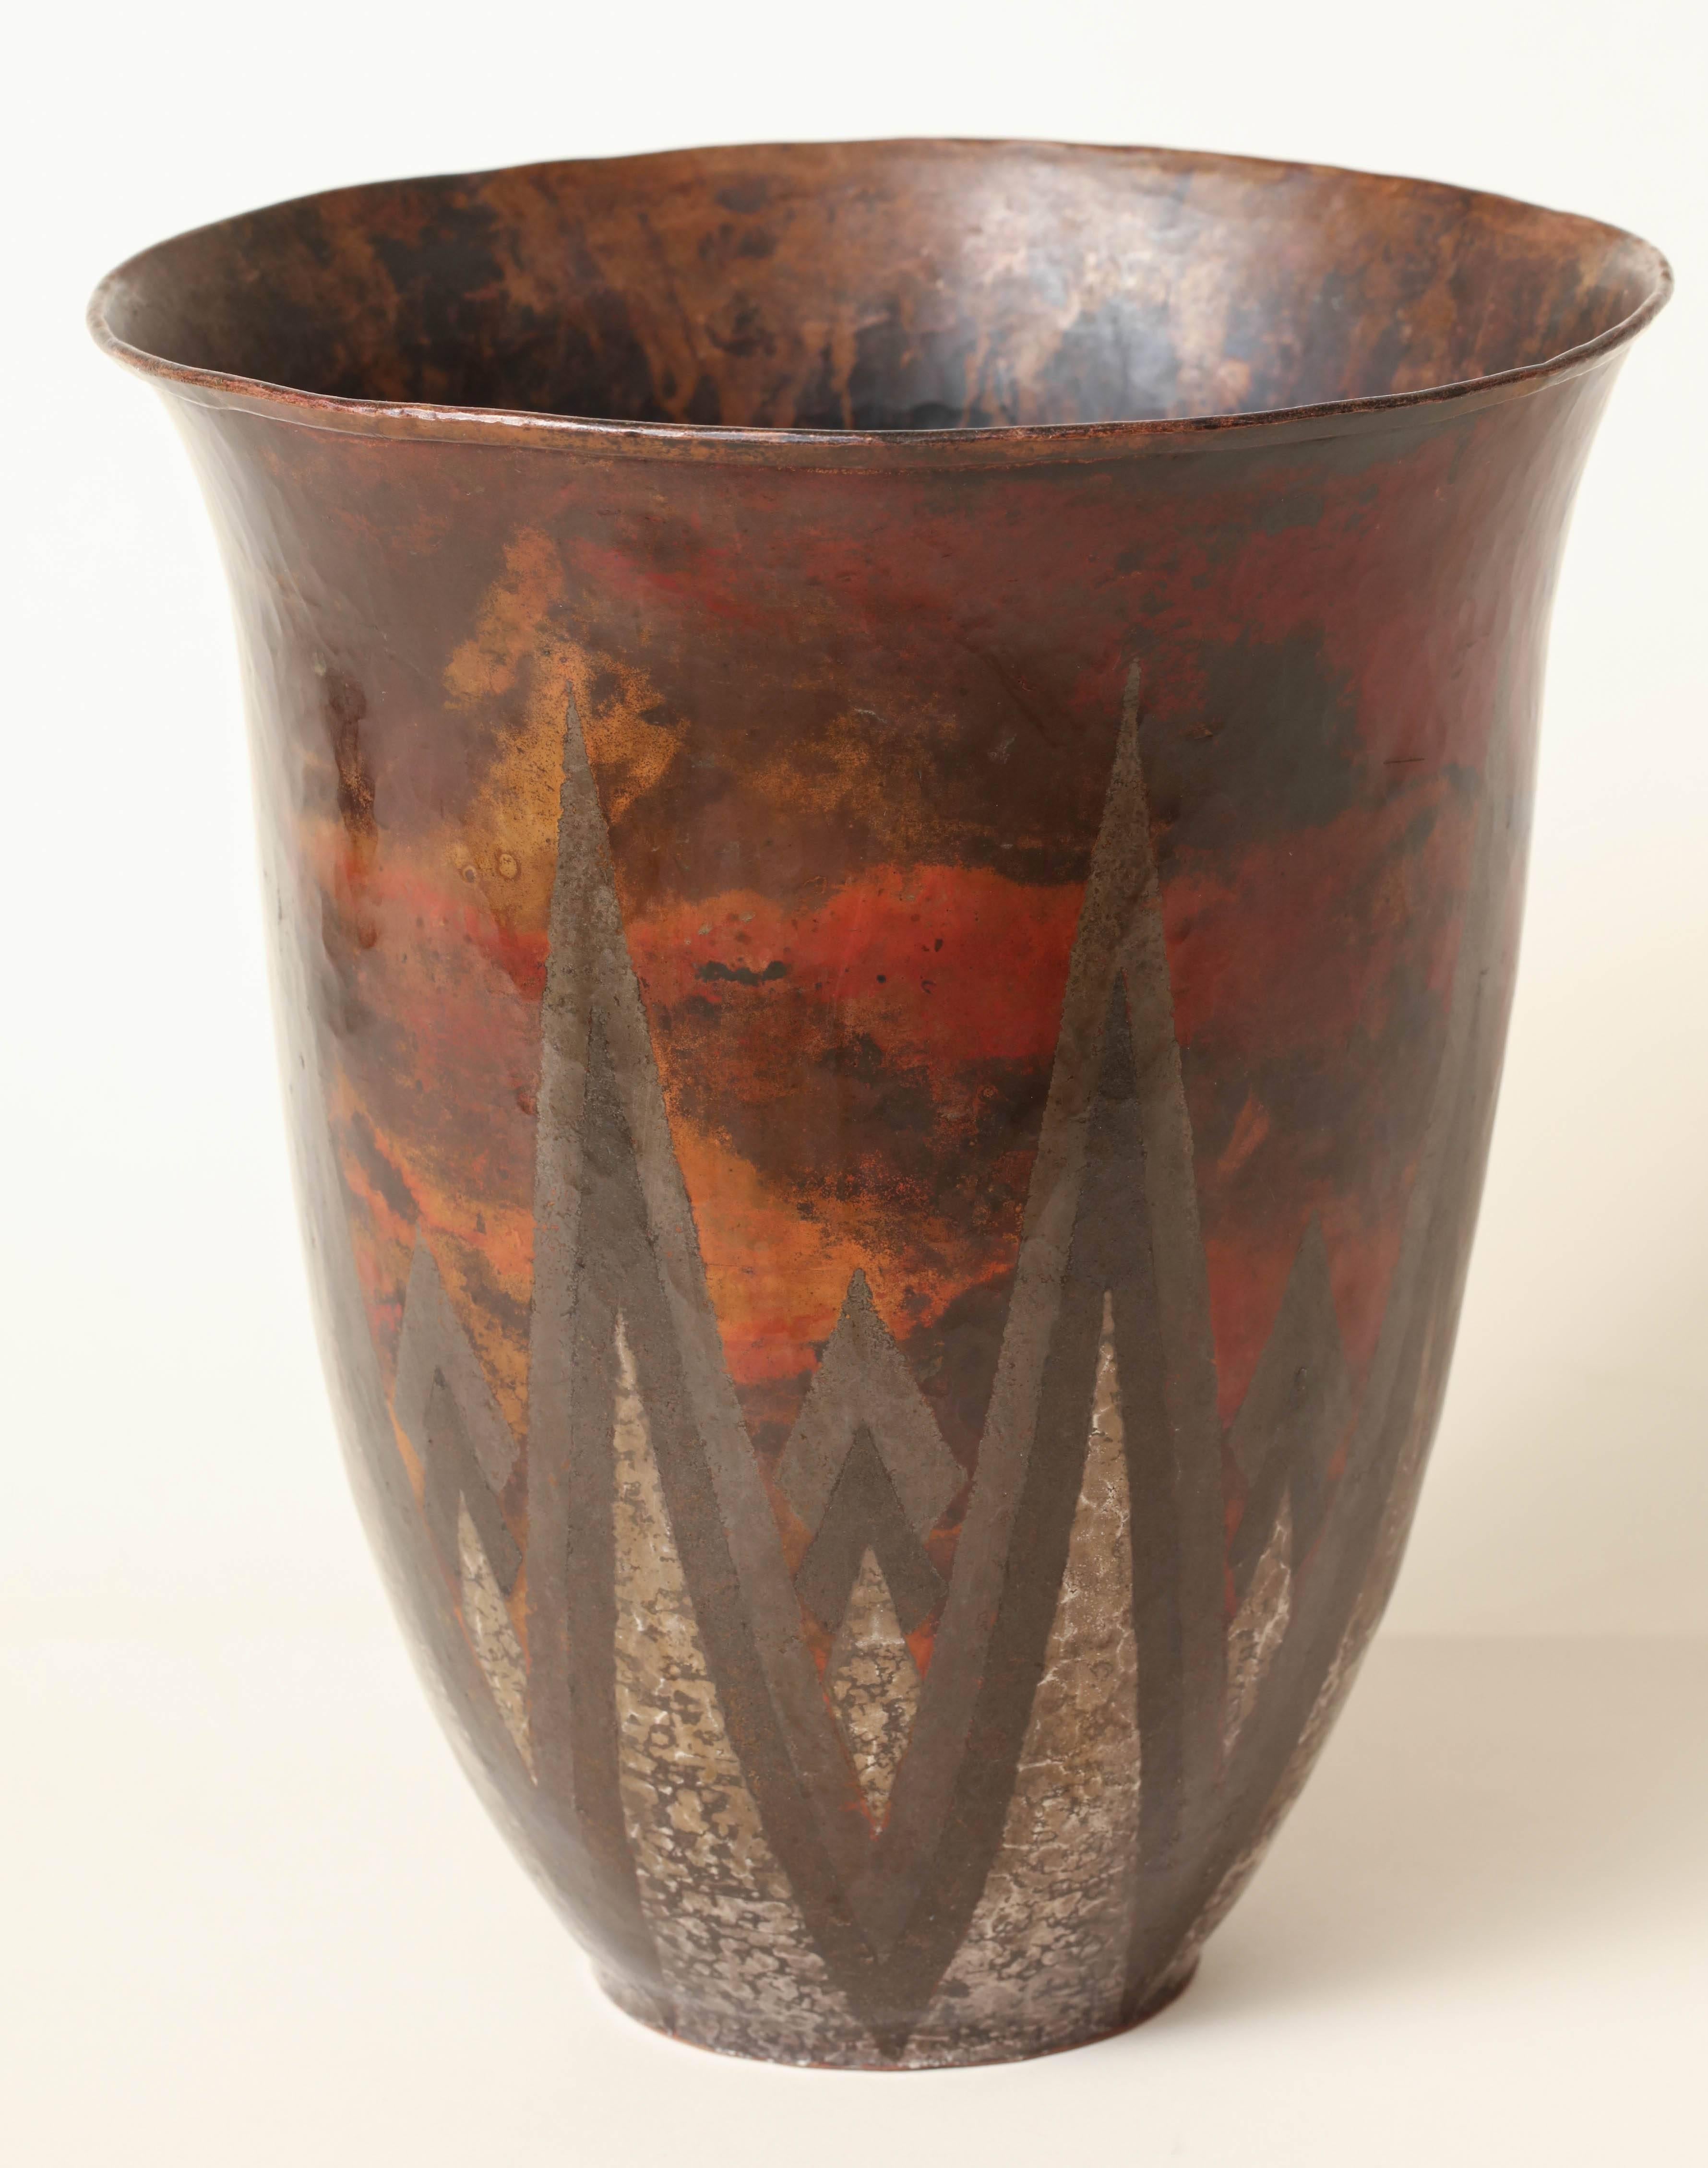 Measures: 9 1/4'' high; 8 1/8'' wide

This dinanderie copper and silver vase has a martele oblong body with out-turned collar. The decor is of stylized foliage in herringbone gray and ochre on a red background. 

Impressed CL-Linossier